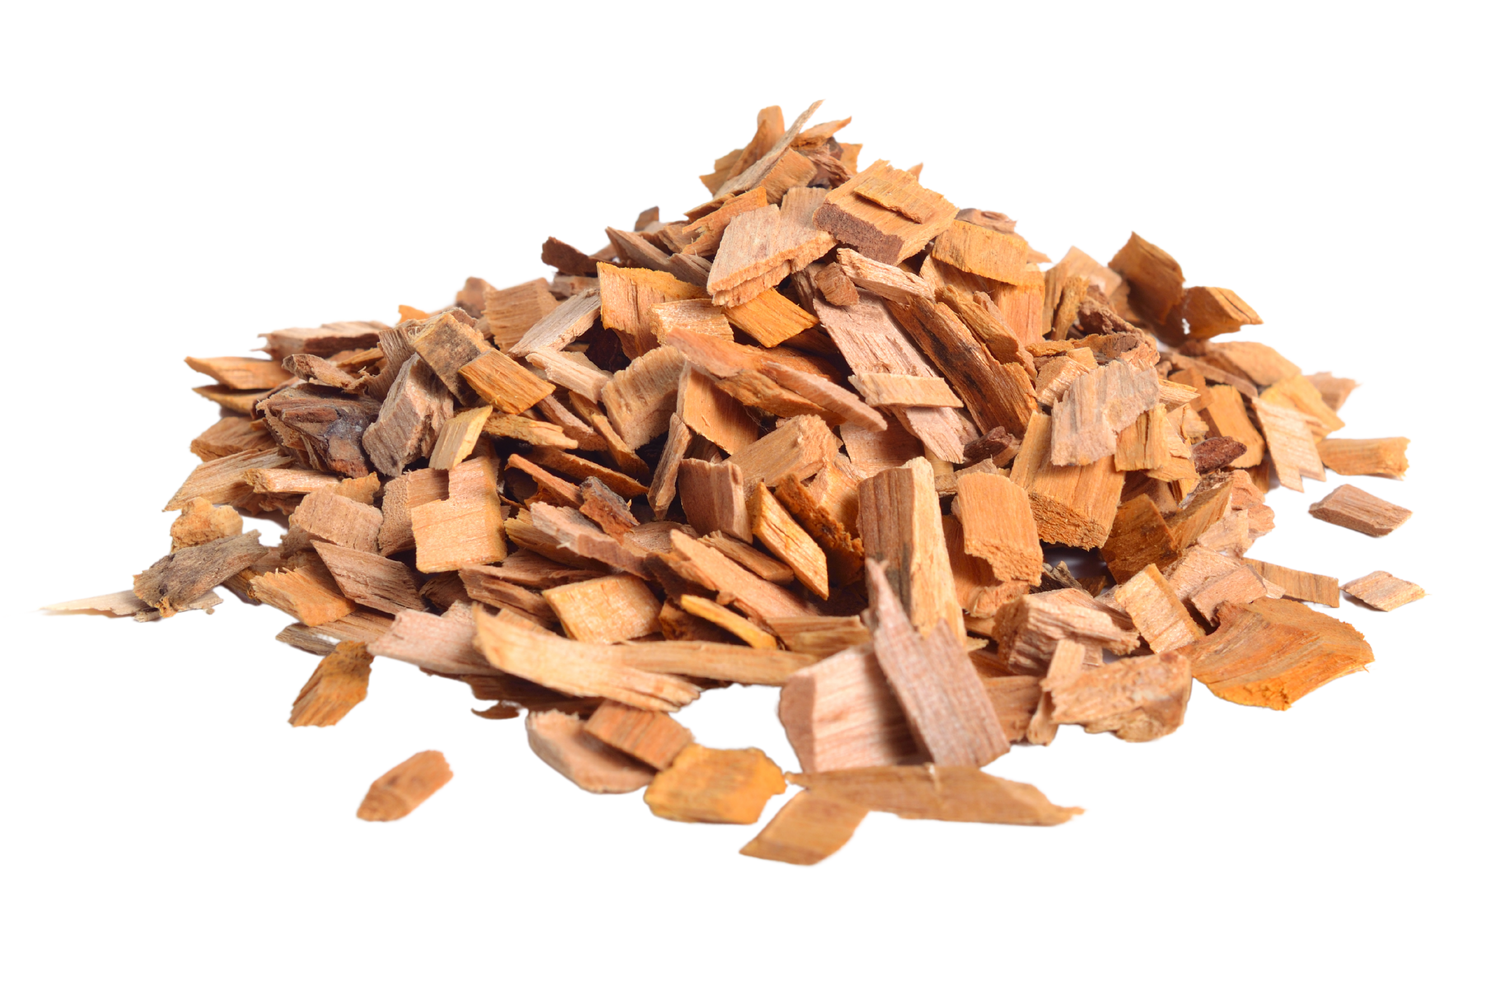 Hickory BBQ Wood Chips